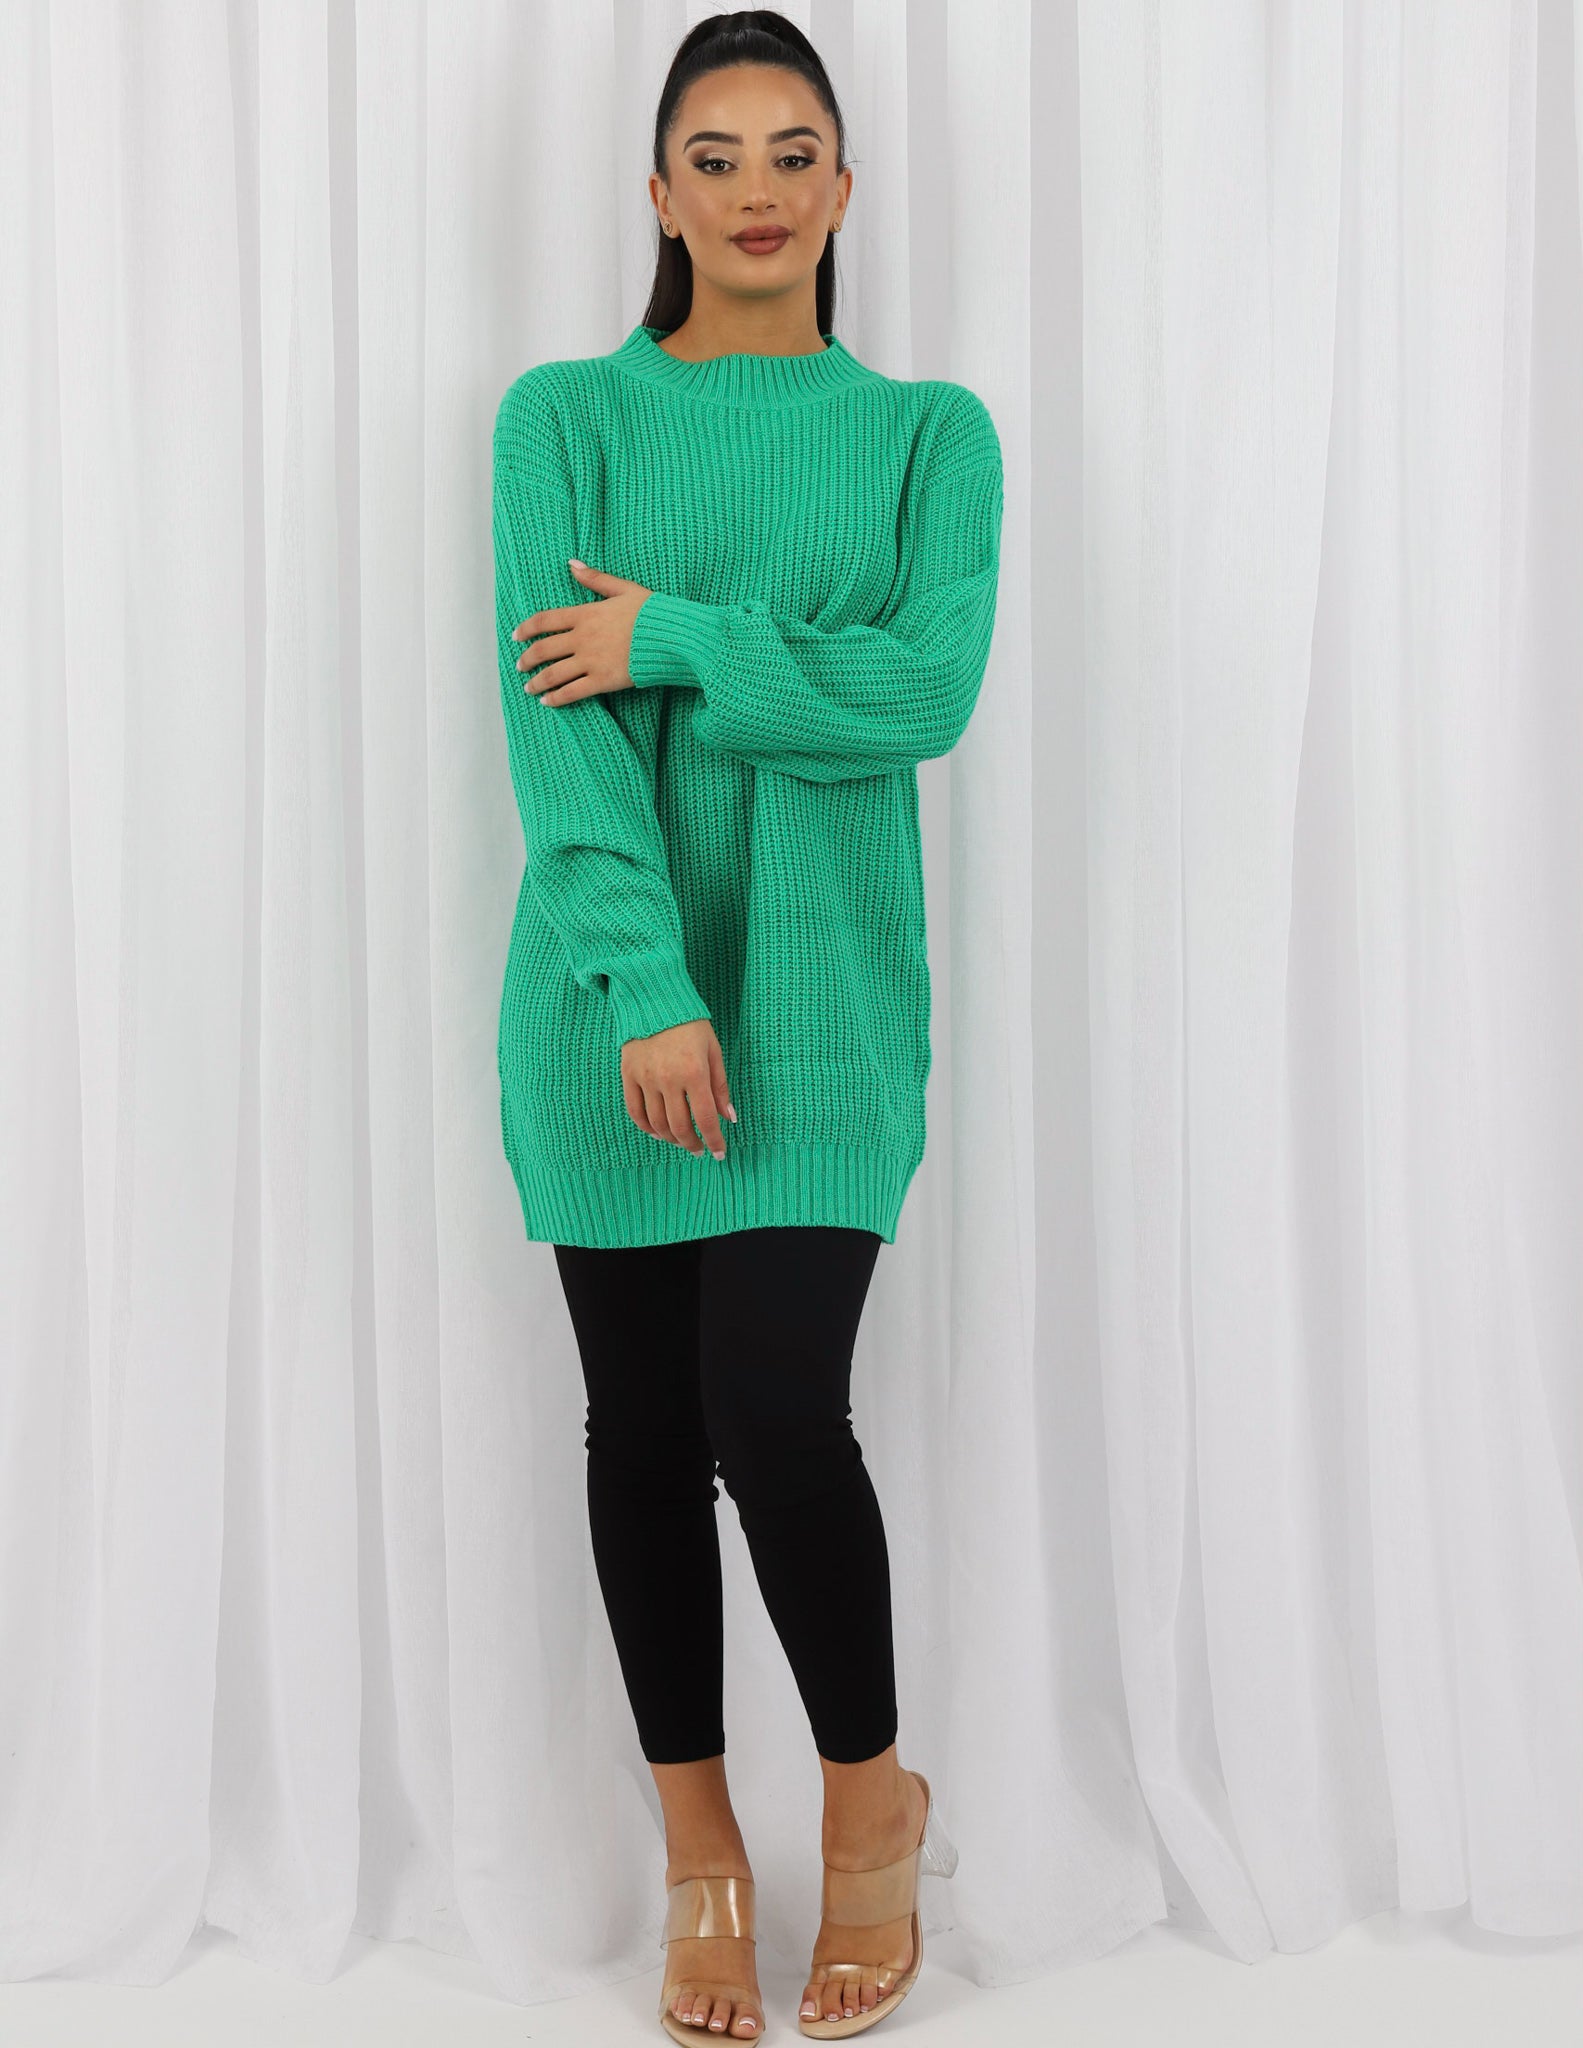 2212-GRN-top-blouse